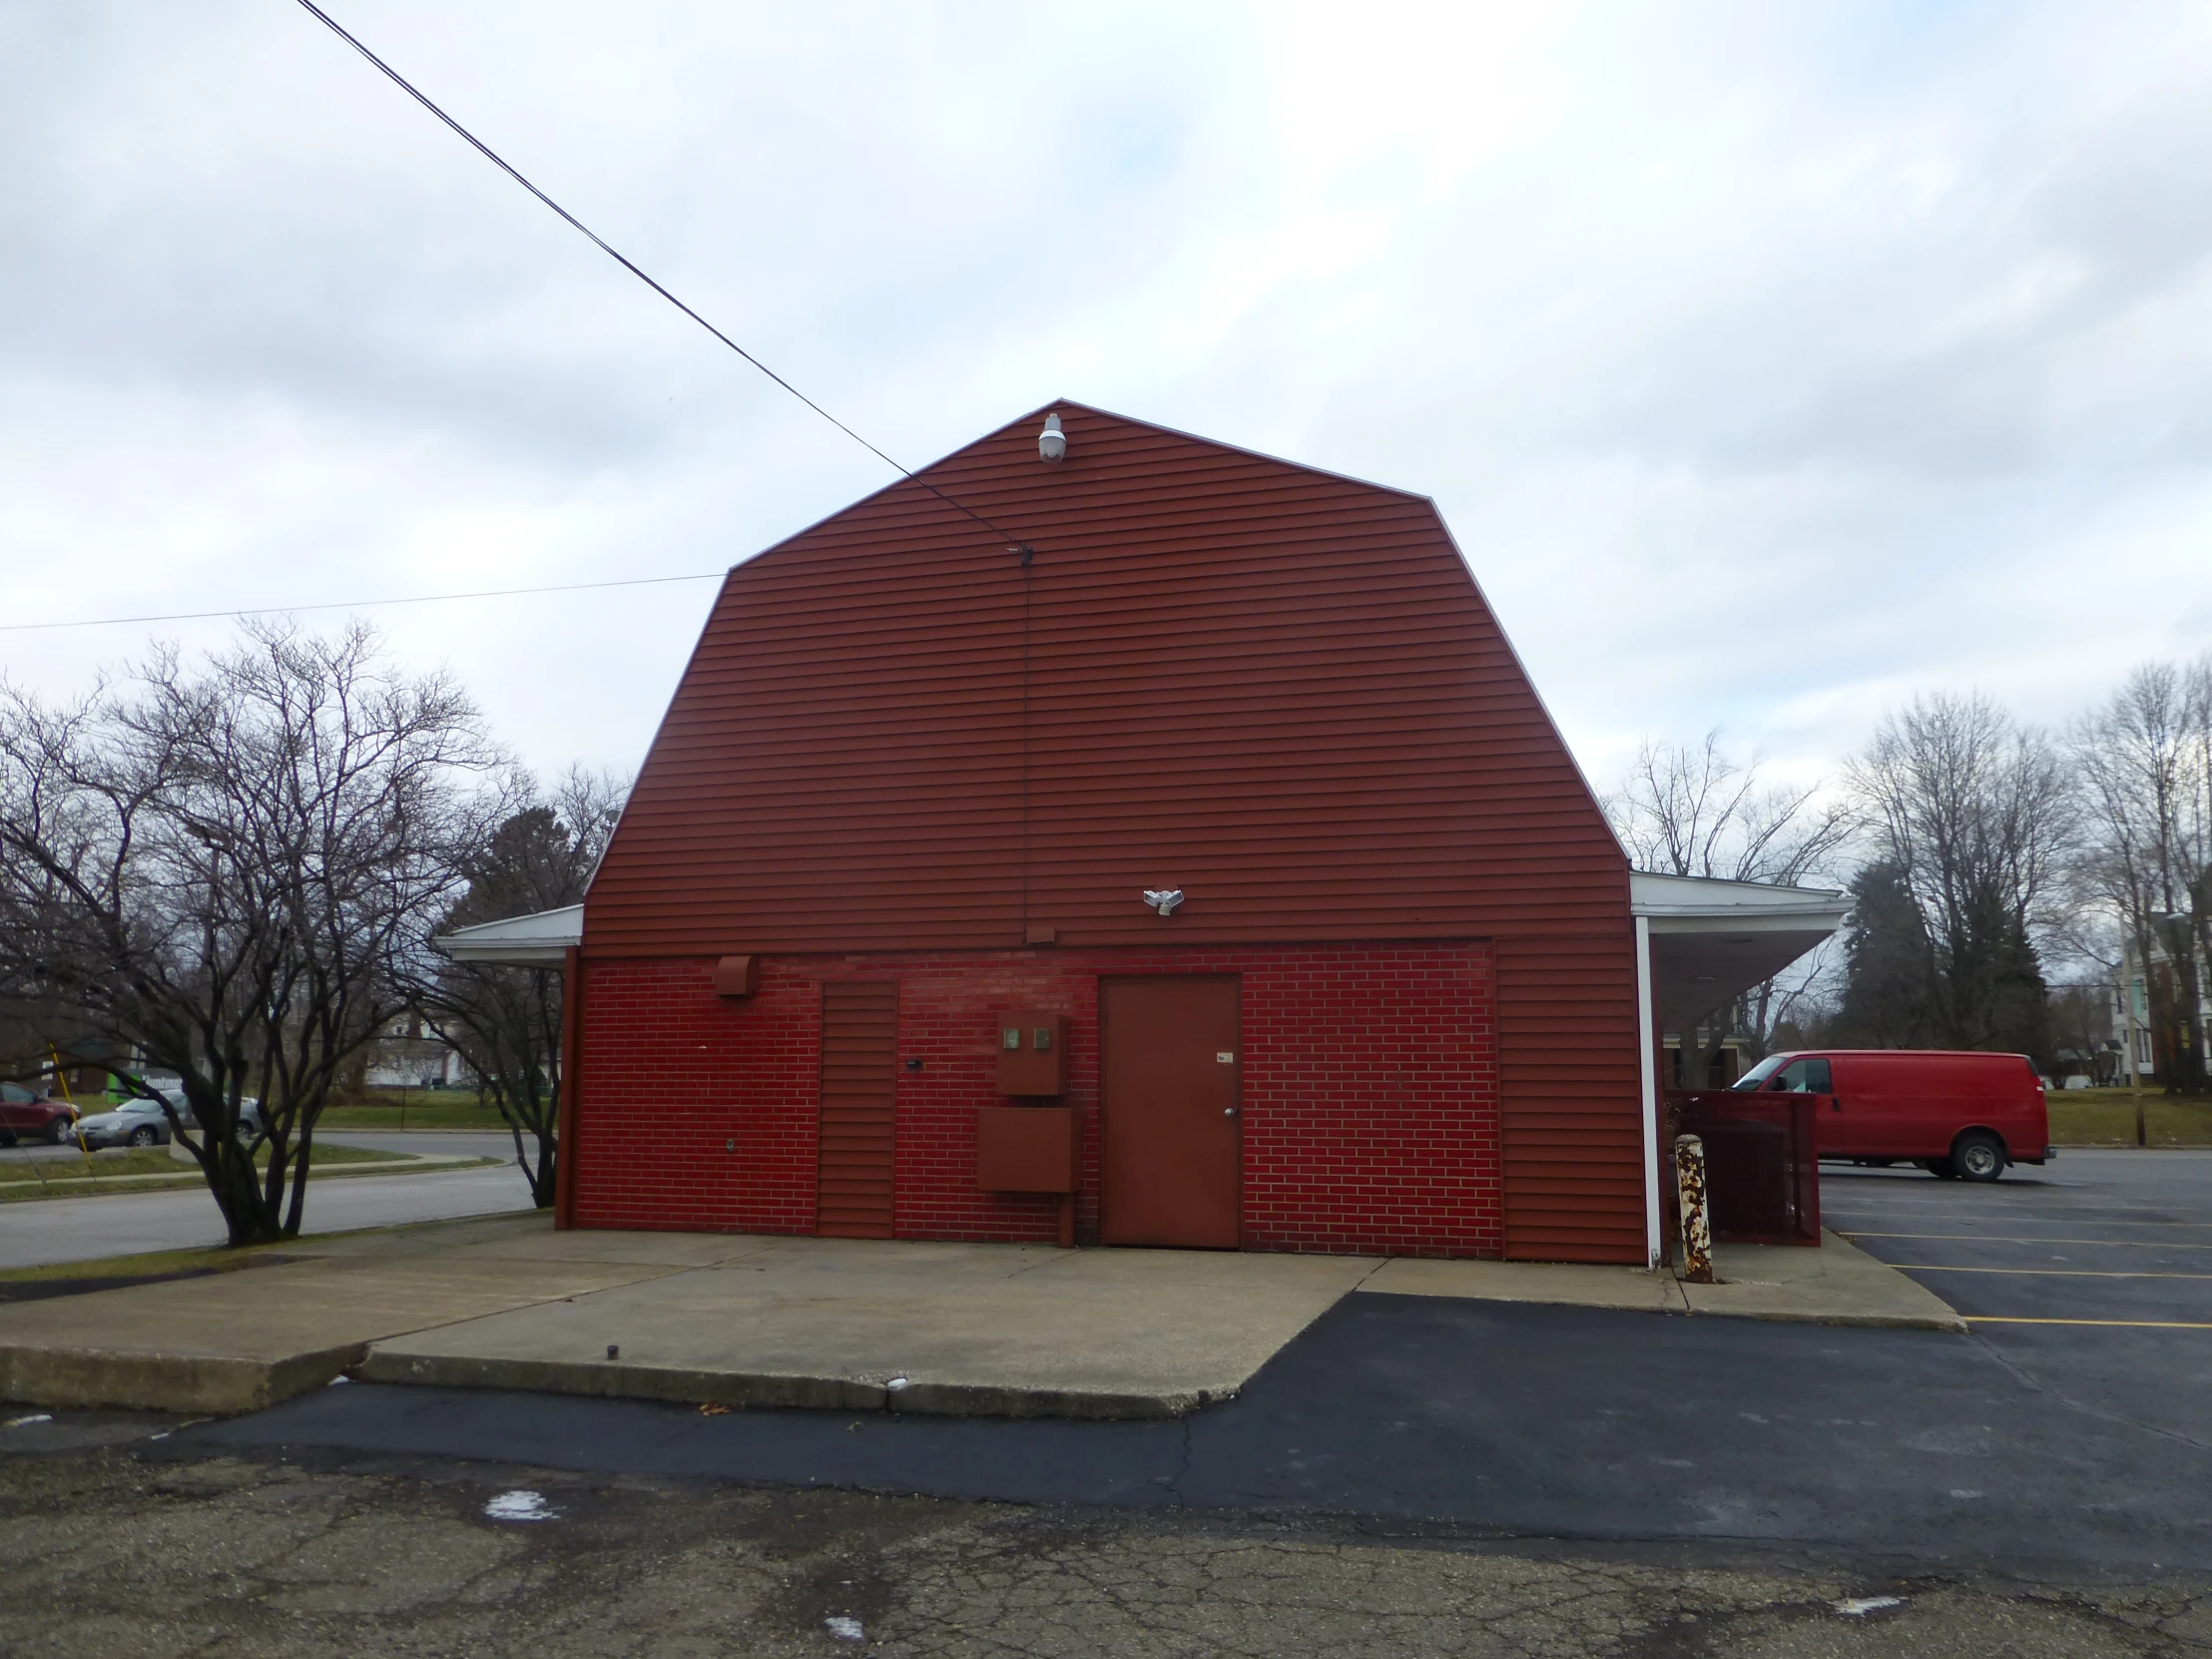 an empty parking lot with two red barns